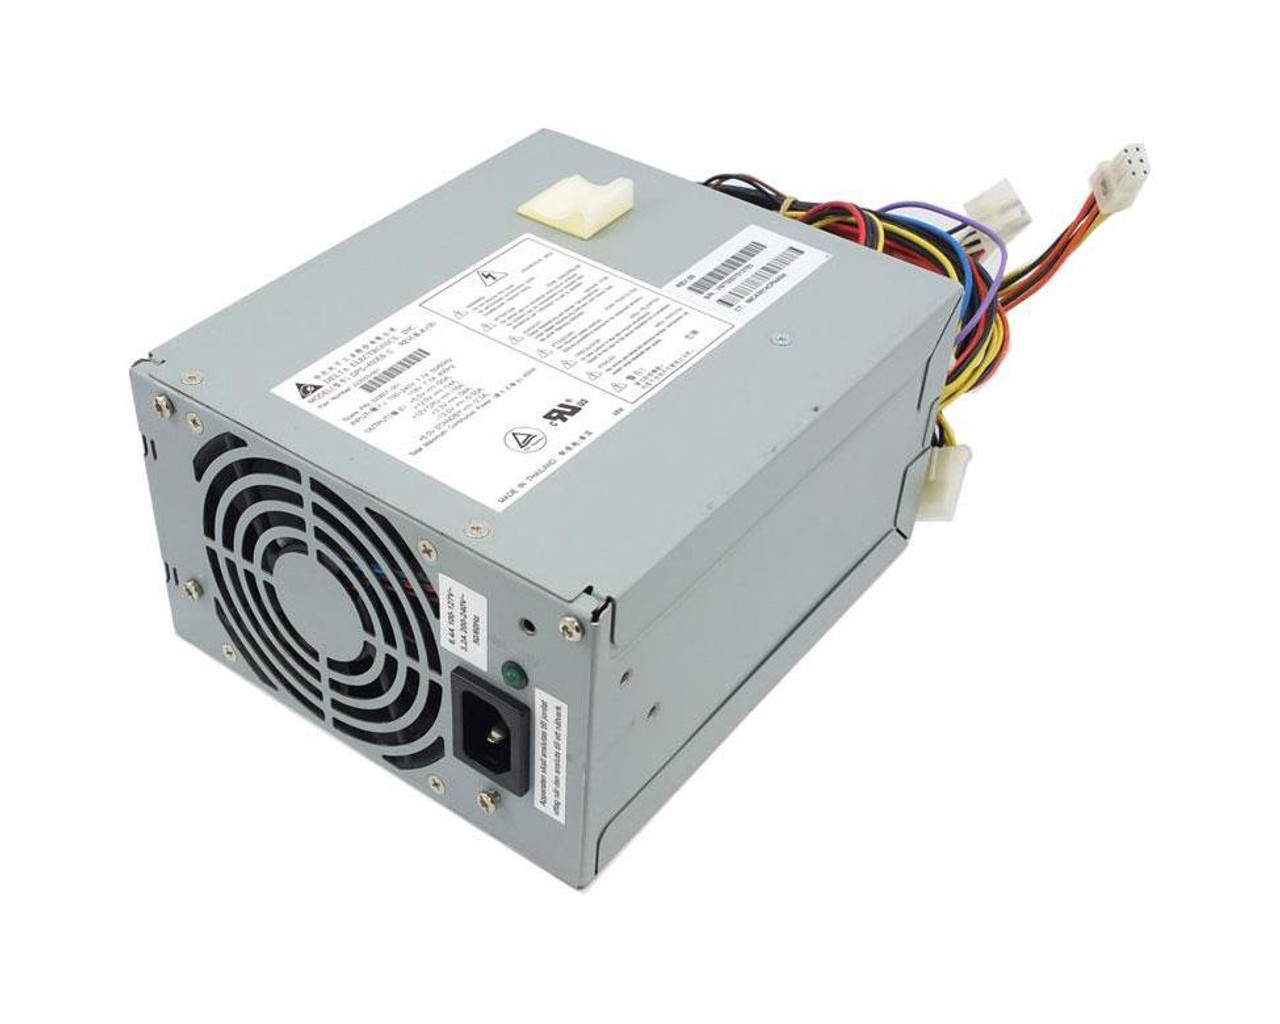 DPS-450EB-A HP 450-Watts 100-240V AC Redundant Hot Swap Power Supply with Active PFC for XW8000 WorkStation